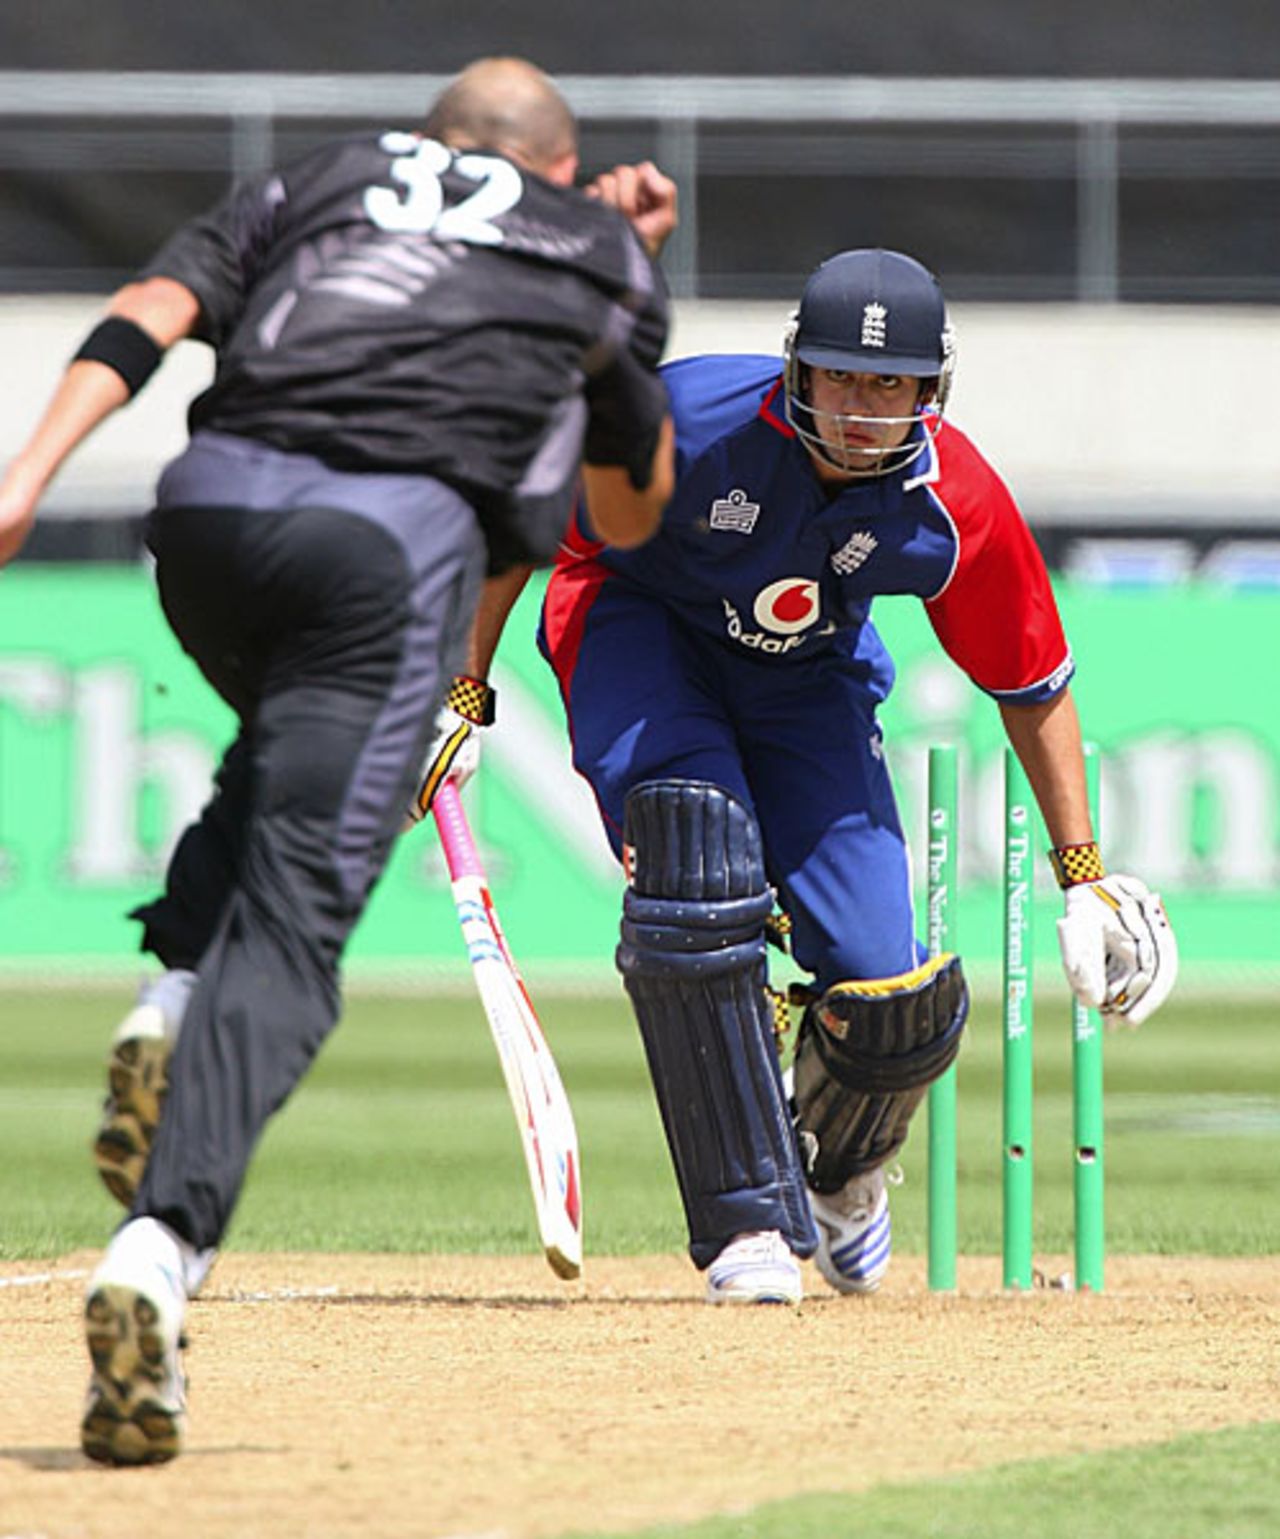 Alastair Cook is bowled by Chris Martin, New Zealand v England, 1st ODI, Wellington, February 9, 2008